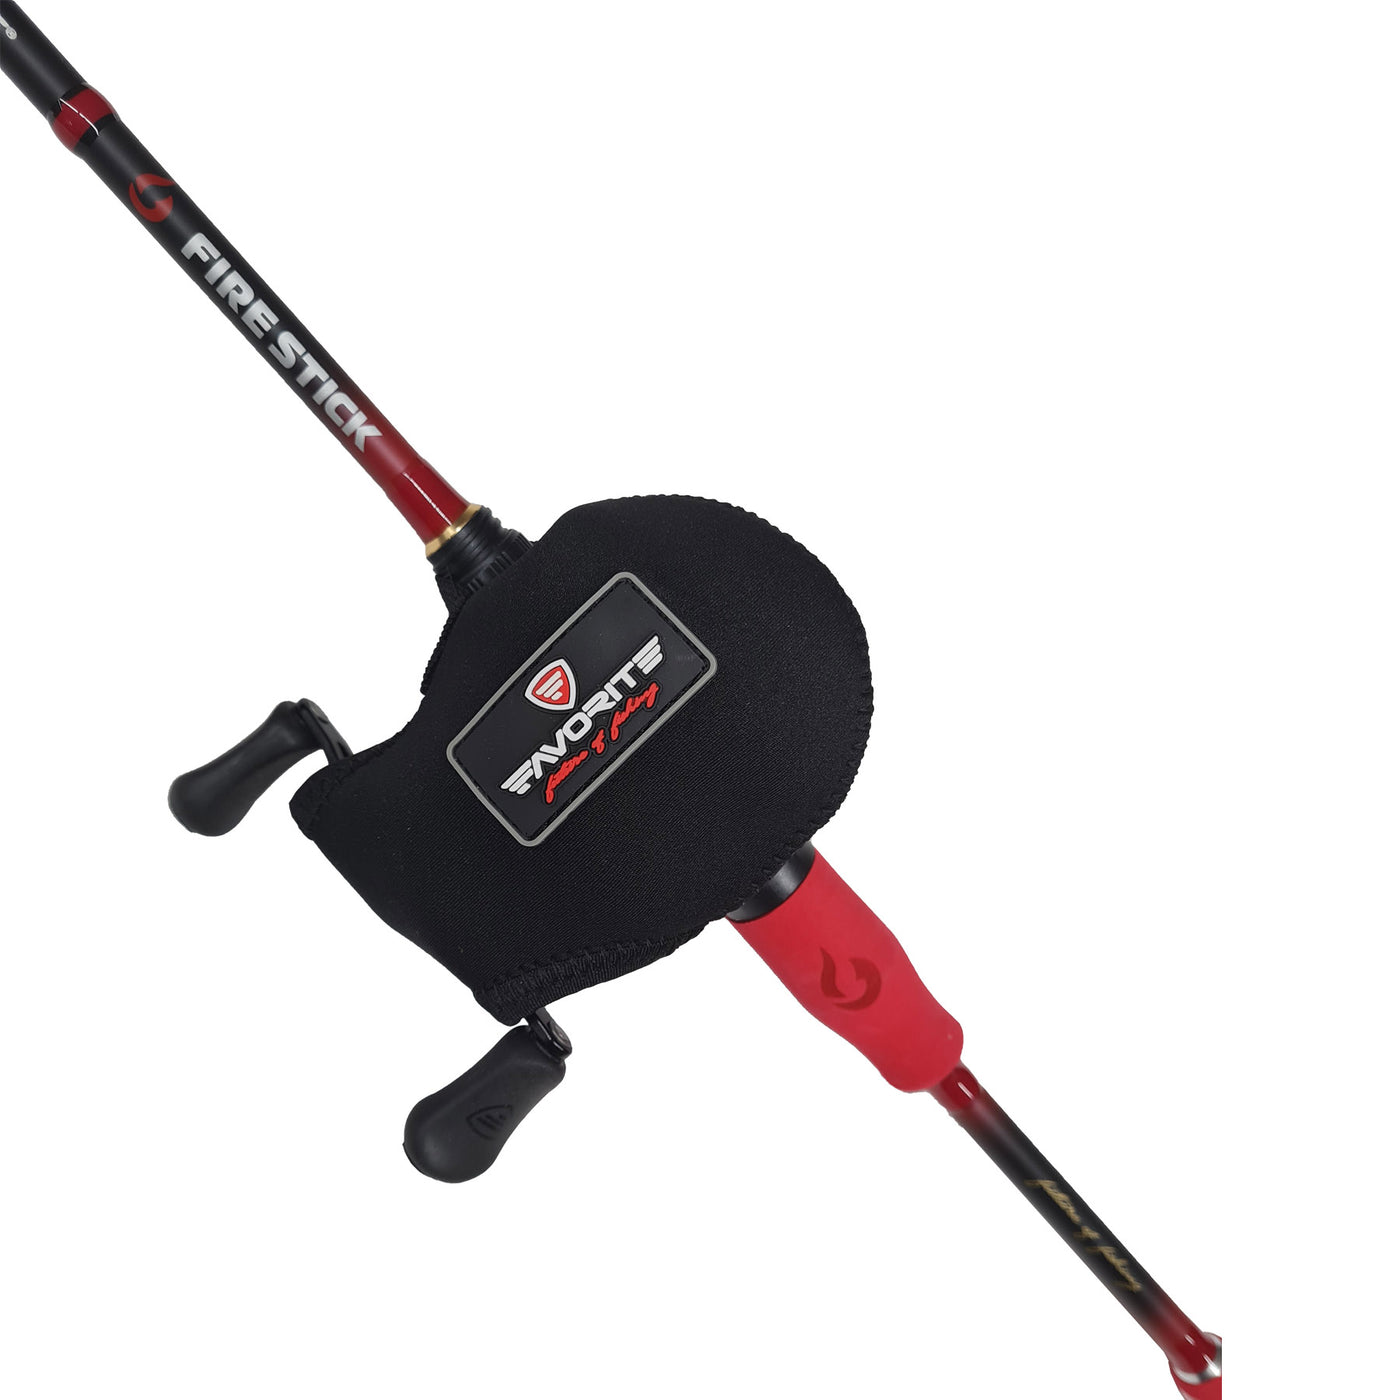 Kufa Sports Fishing Reel Cover Made by 4mm Thickness India